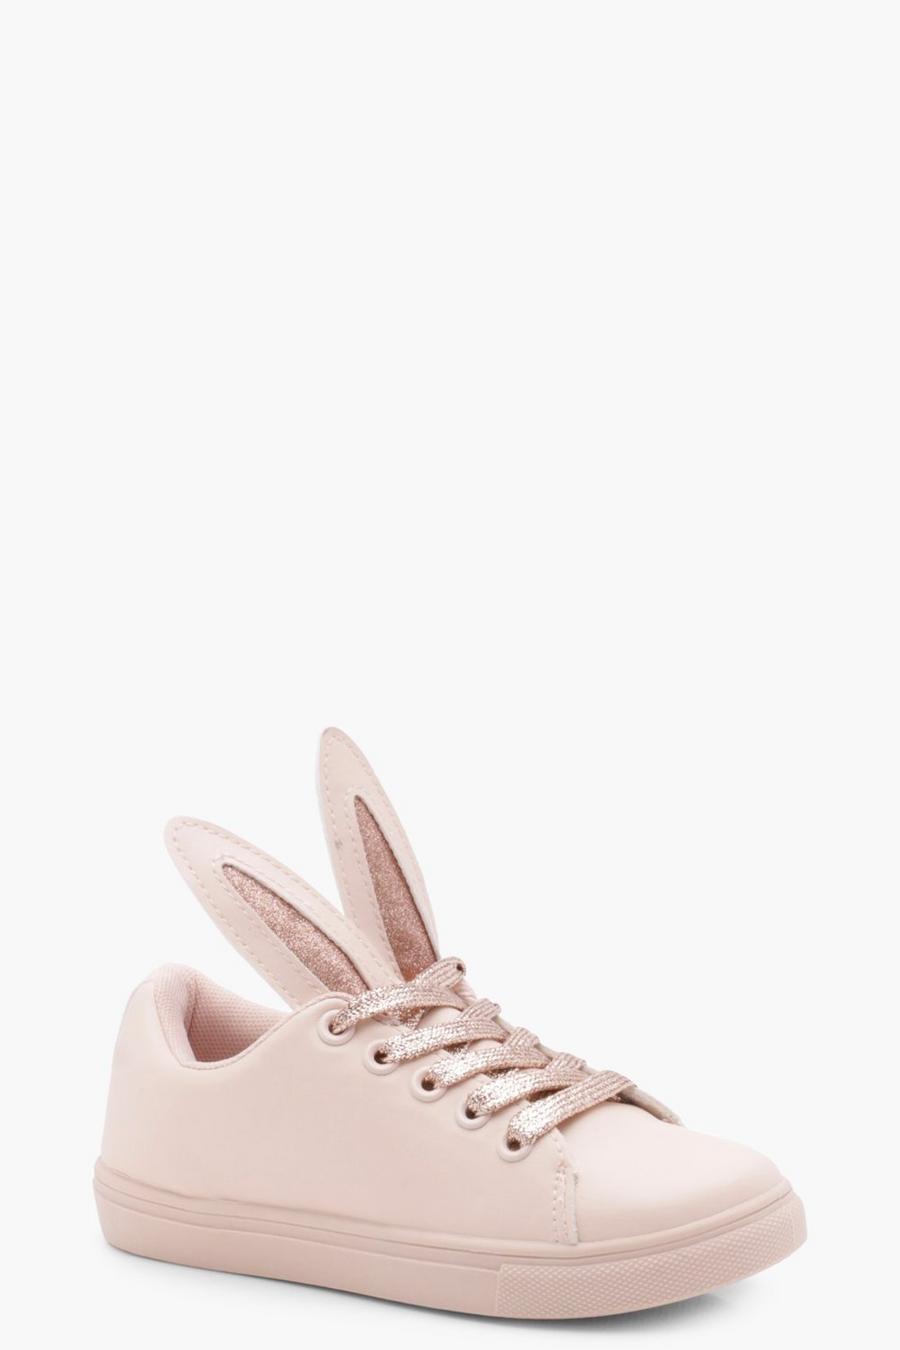 Girls Bunny Ears Lace Up Trainer, Nude image number 1